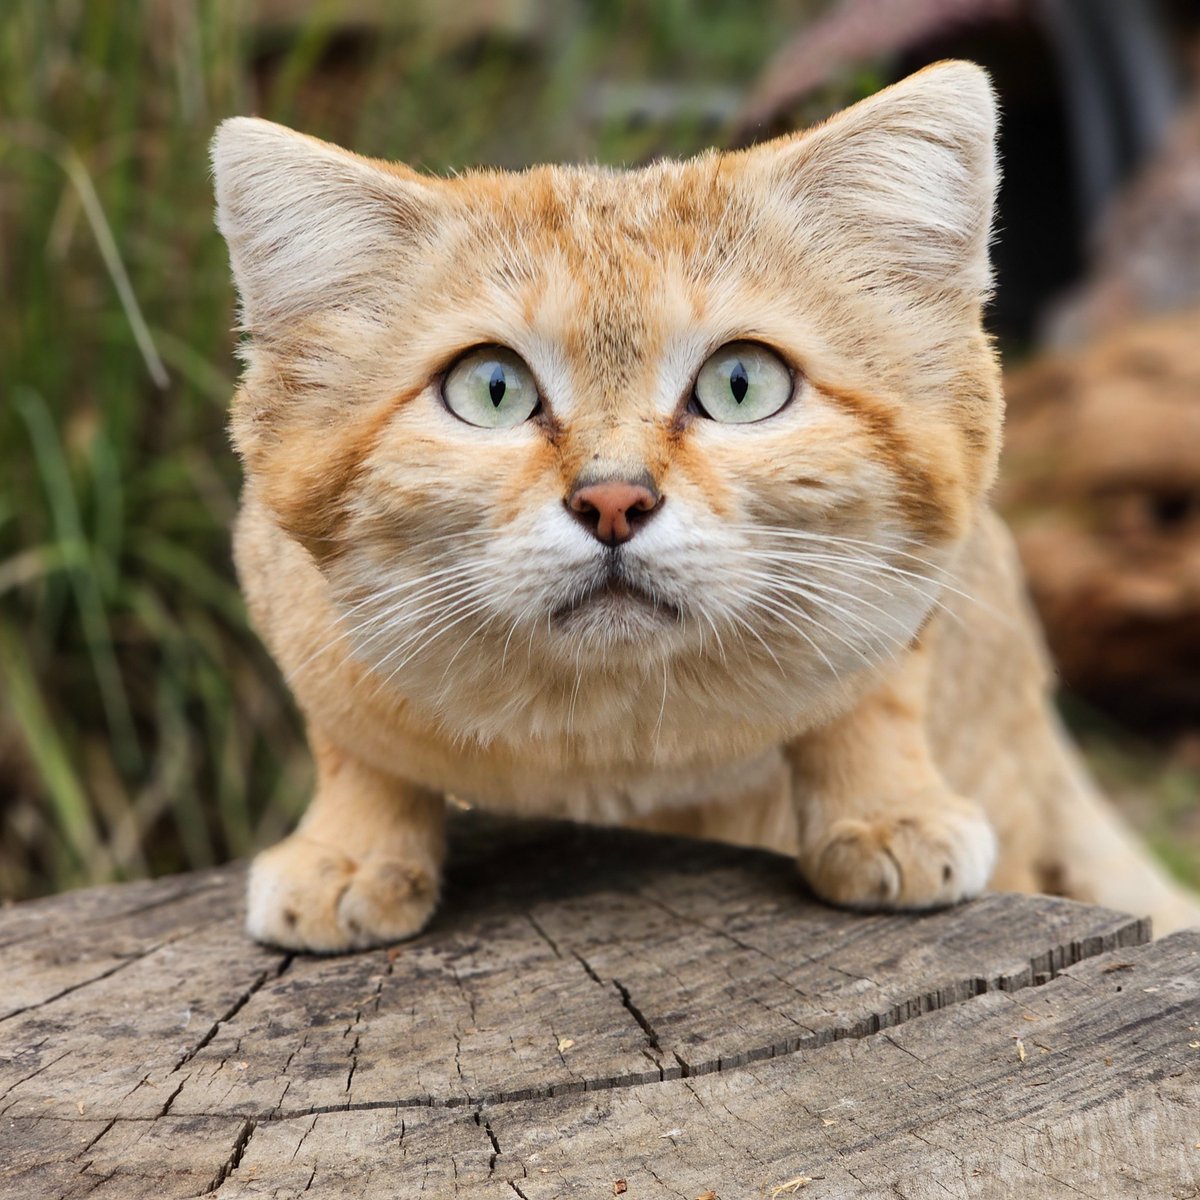 Paws and admire some sand cat purrfection 🐾